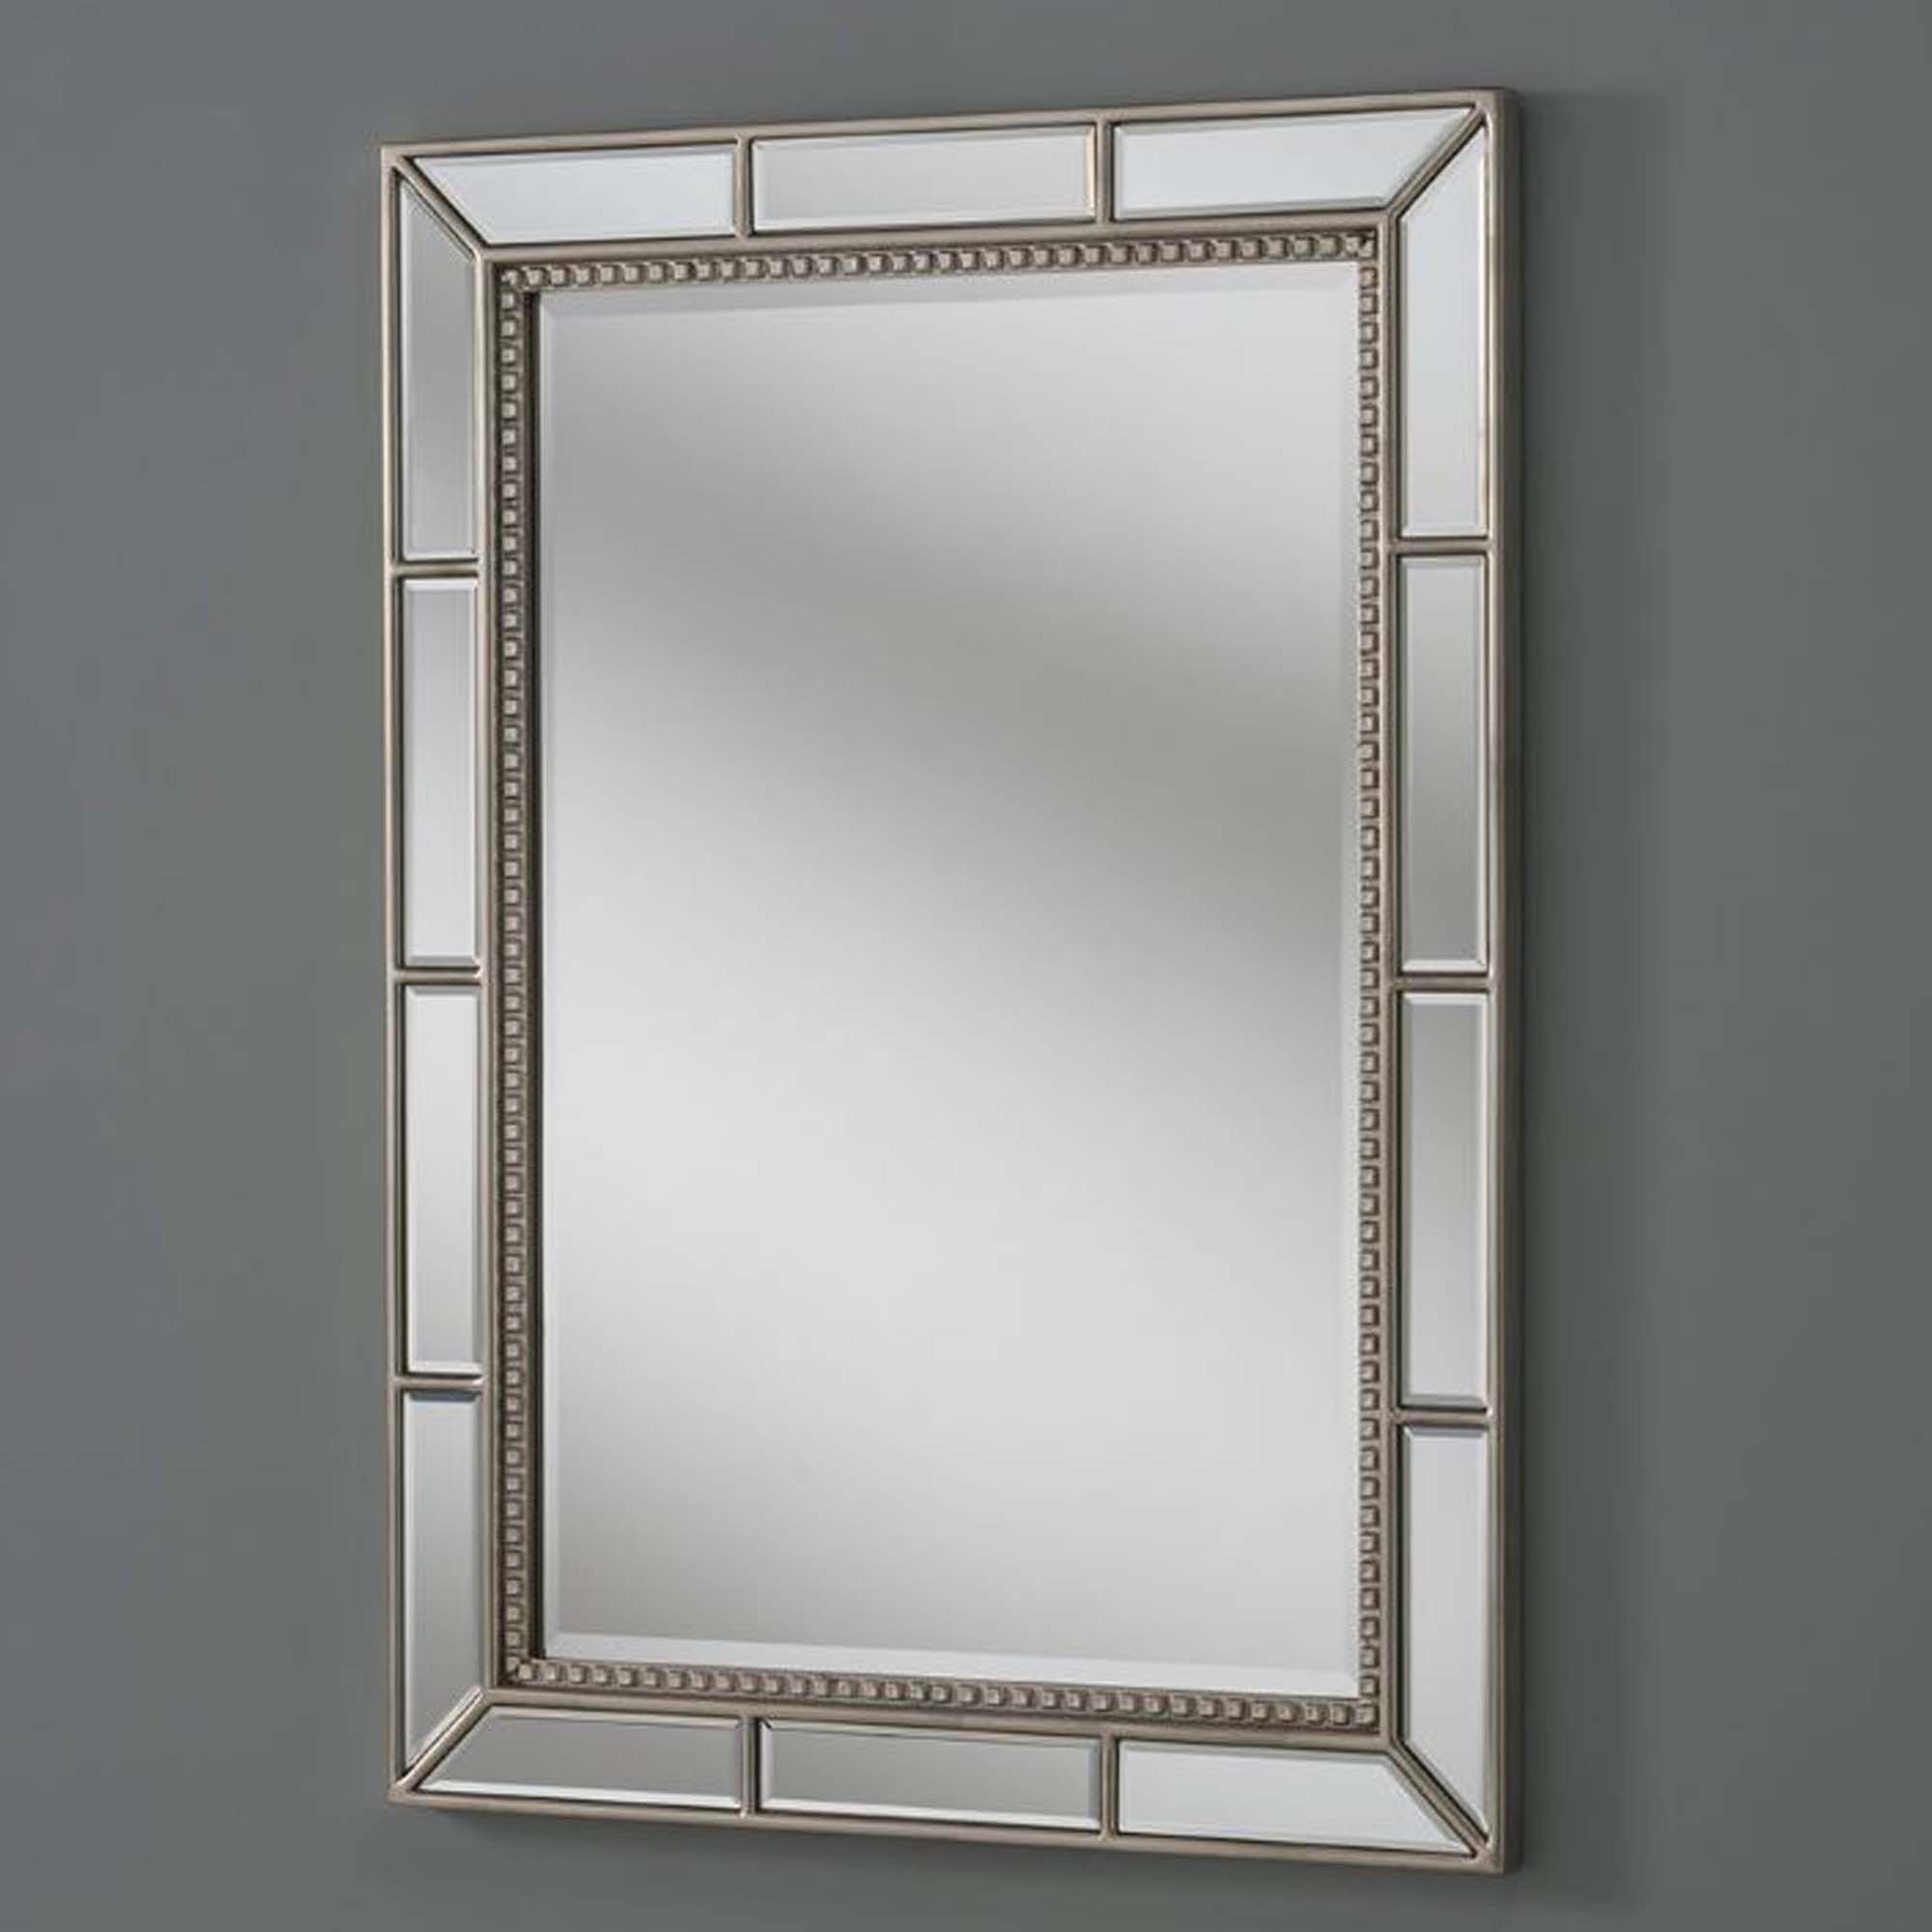 Mirrored Wall Mirror Silver Bevelled Frame | Mirrored Mirror Intended For Silver Quatrefoil Wall Mirrors (View 14 of 15)